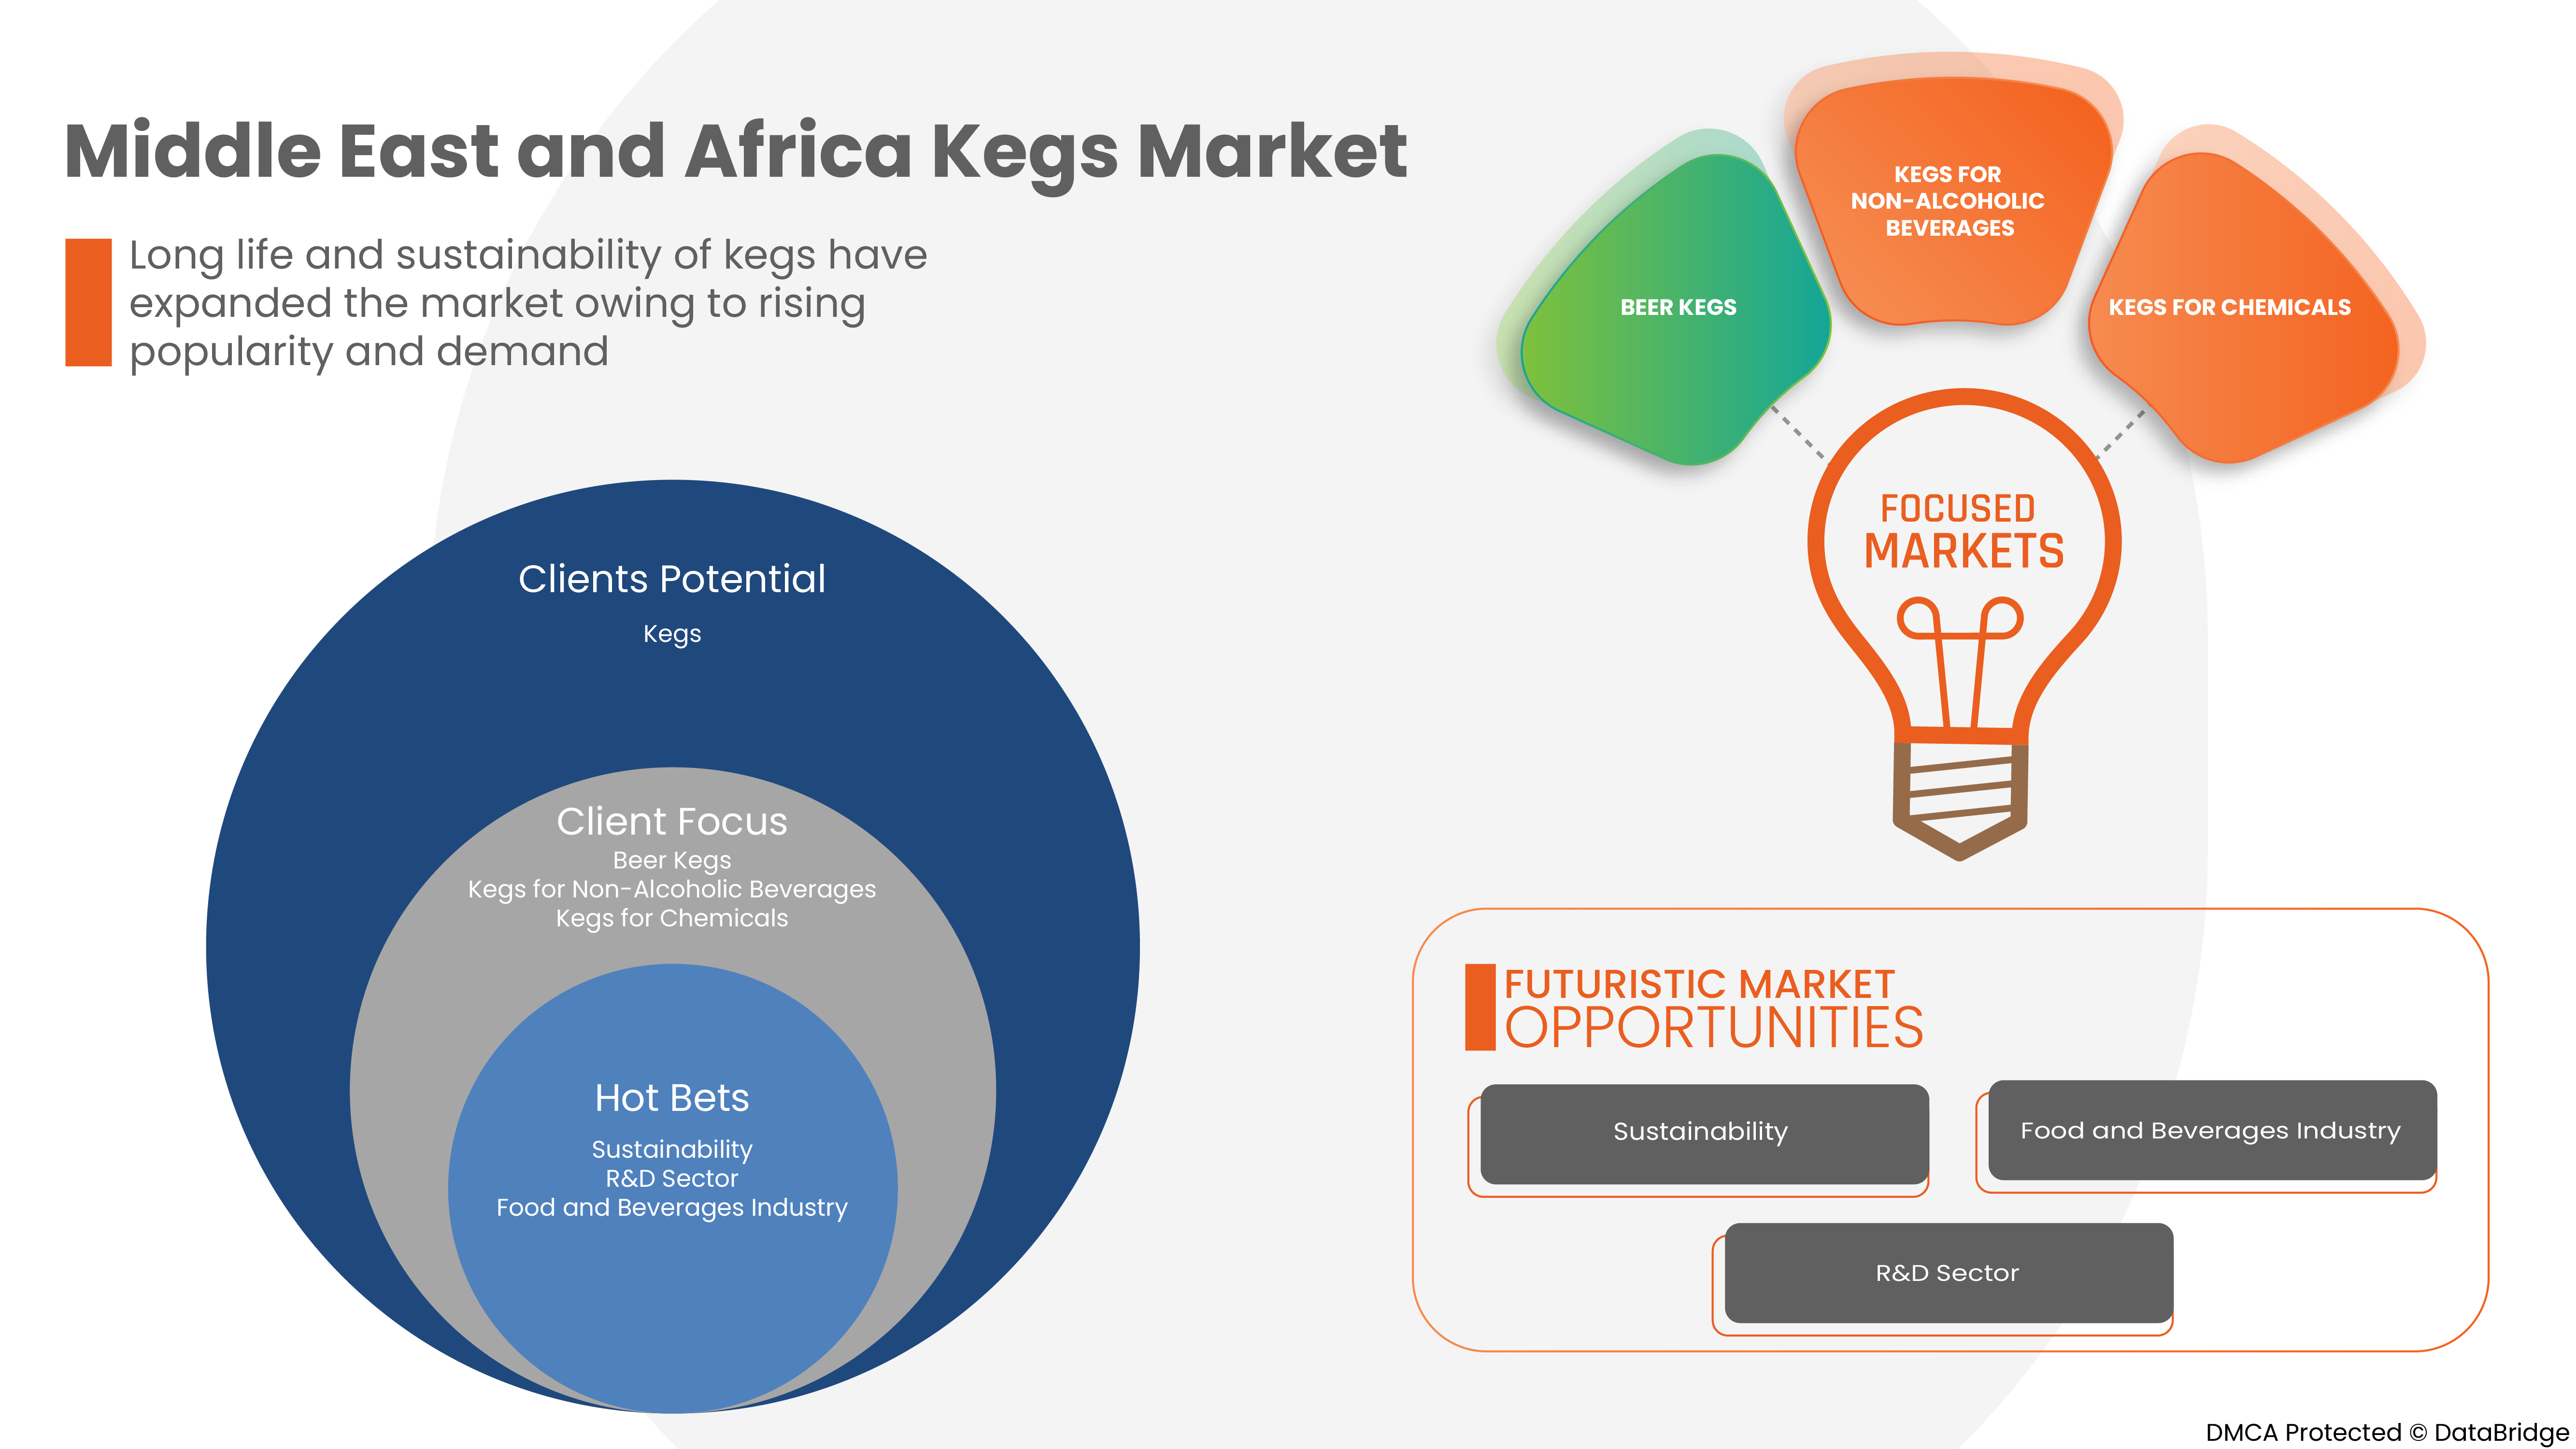 Middle East and Africa Kegs Market